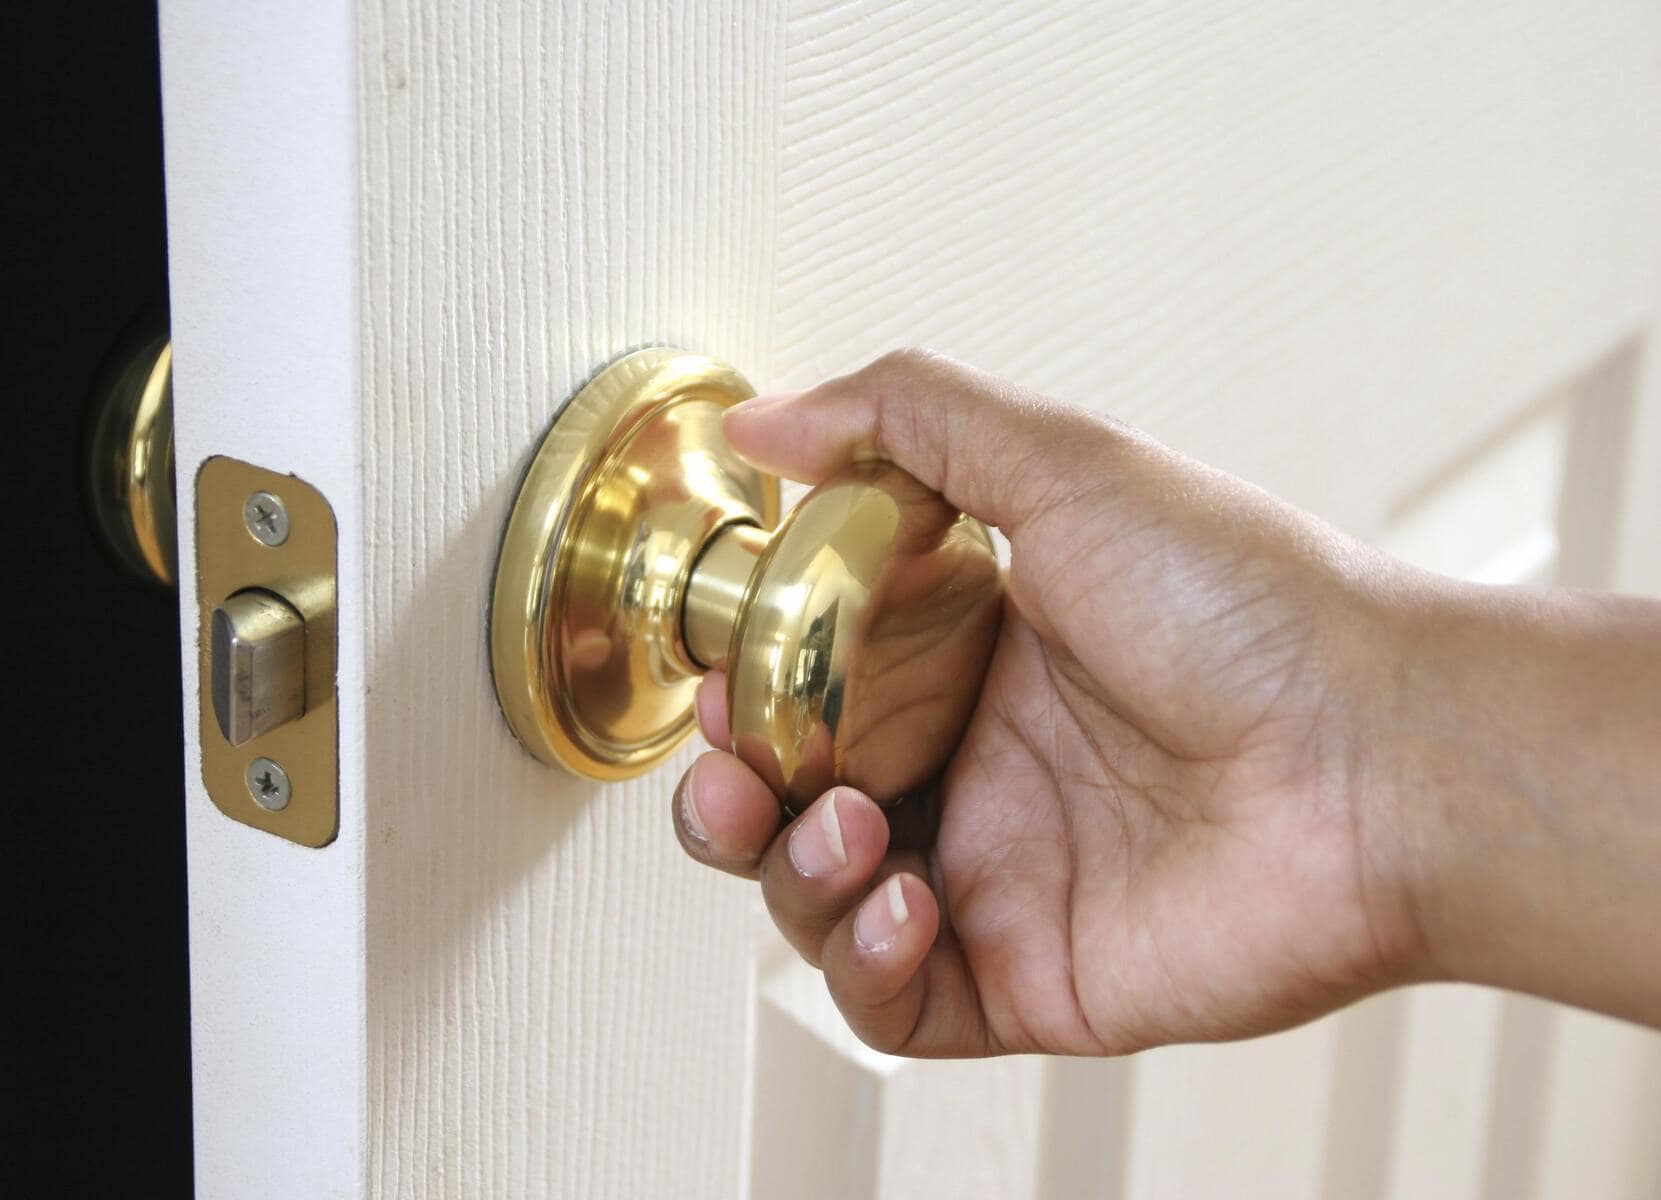 Most People Know That Cold And Flu Viruses Can Contaminate Doorknobs, Handrails, Elevator Buttons And Other Surfaces.